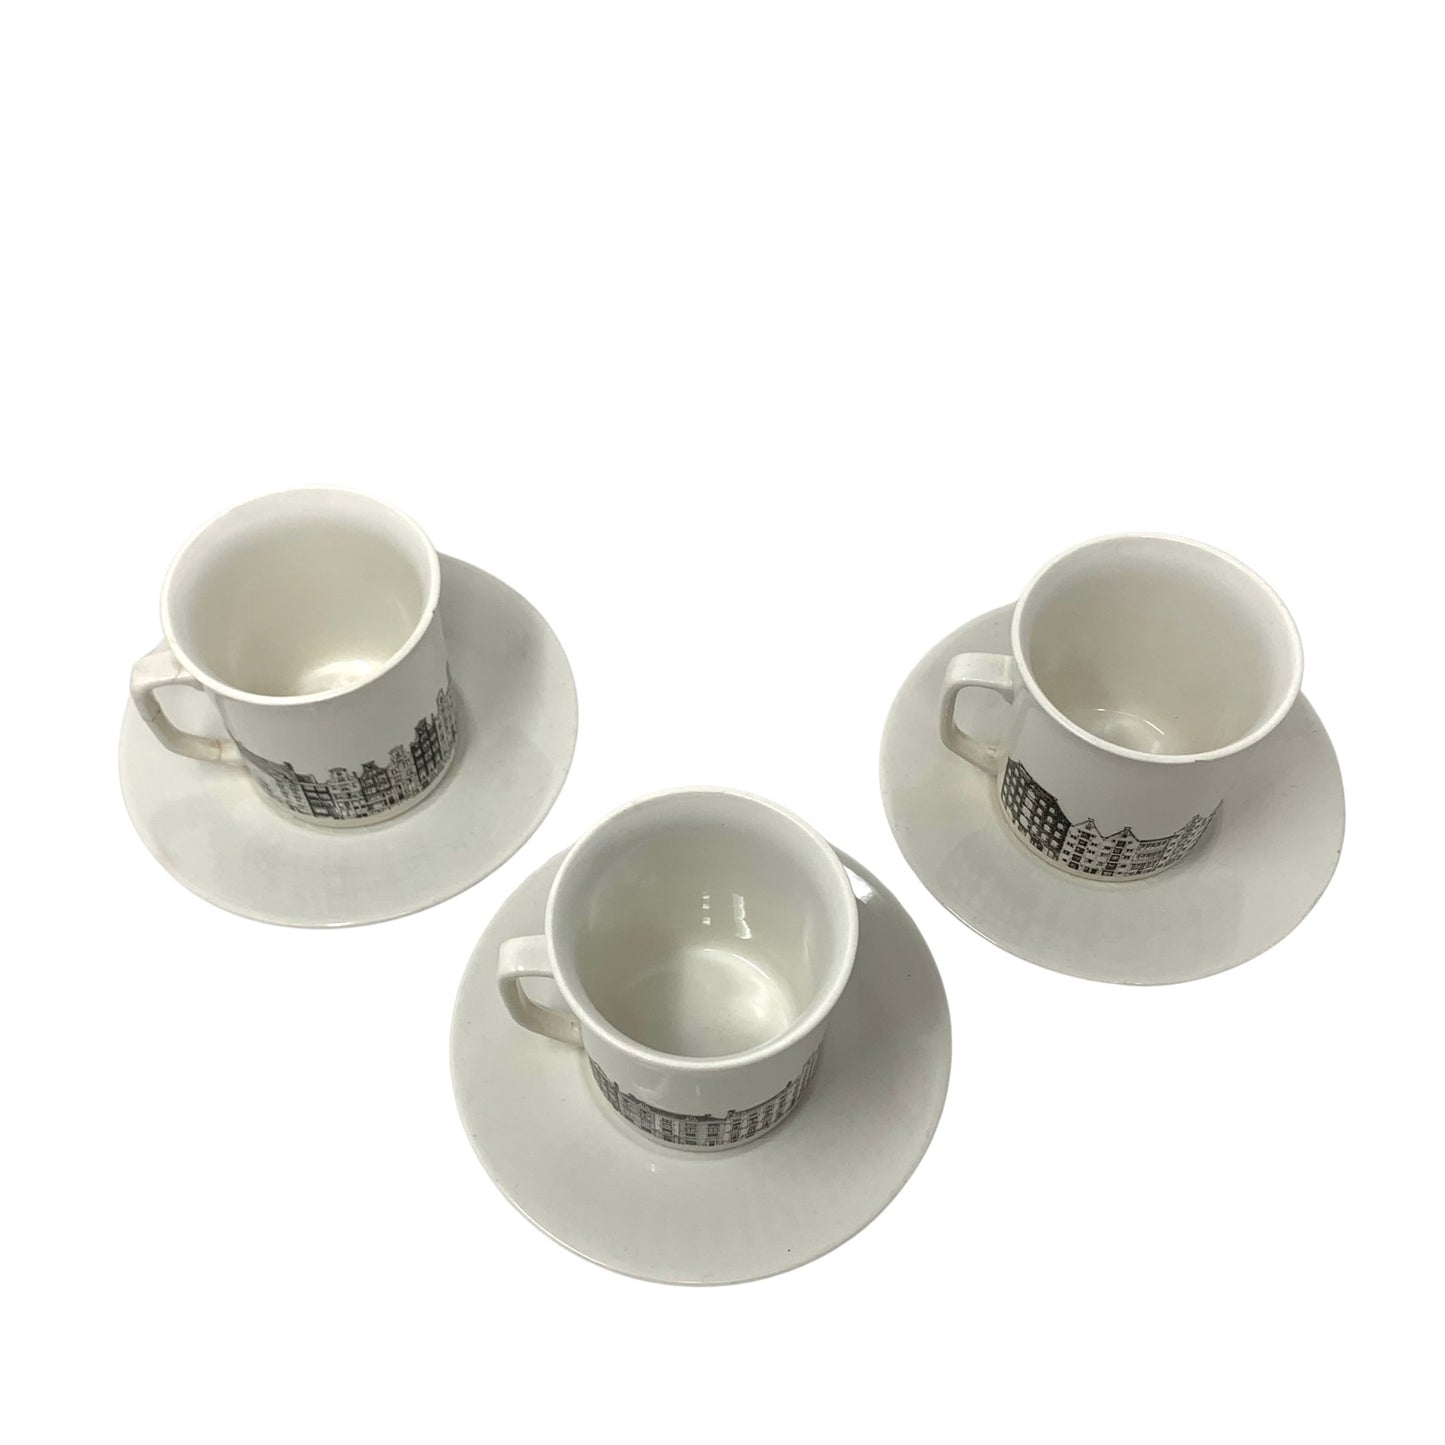 Villeroy & Boch "Amsterdam Canals" 9pc Coffee Service